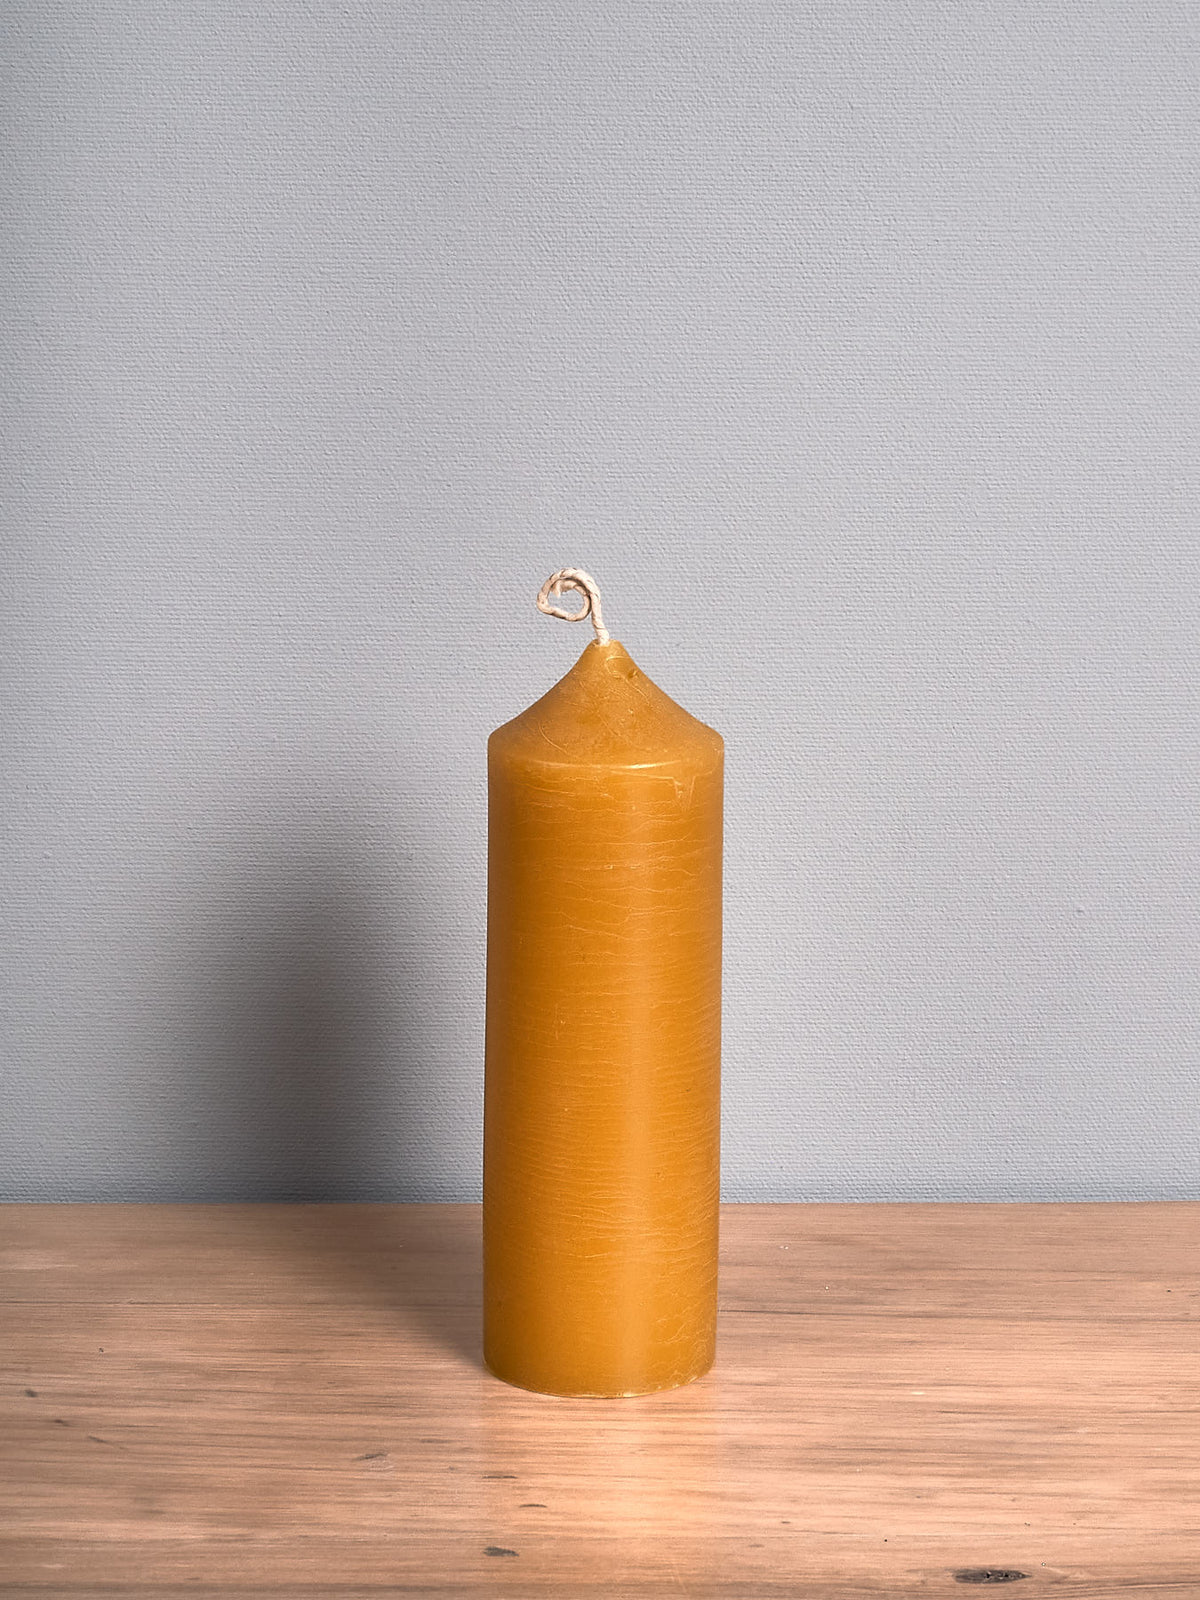 A Cafe Candle – Medium by Hohepa Candles sitting on a wooden table.